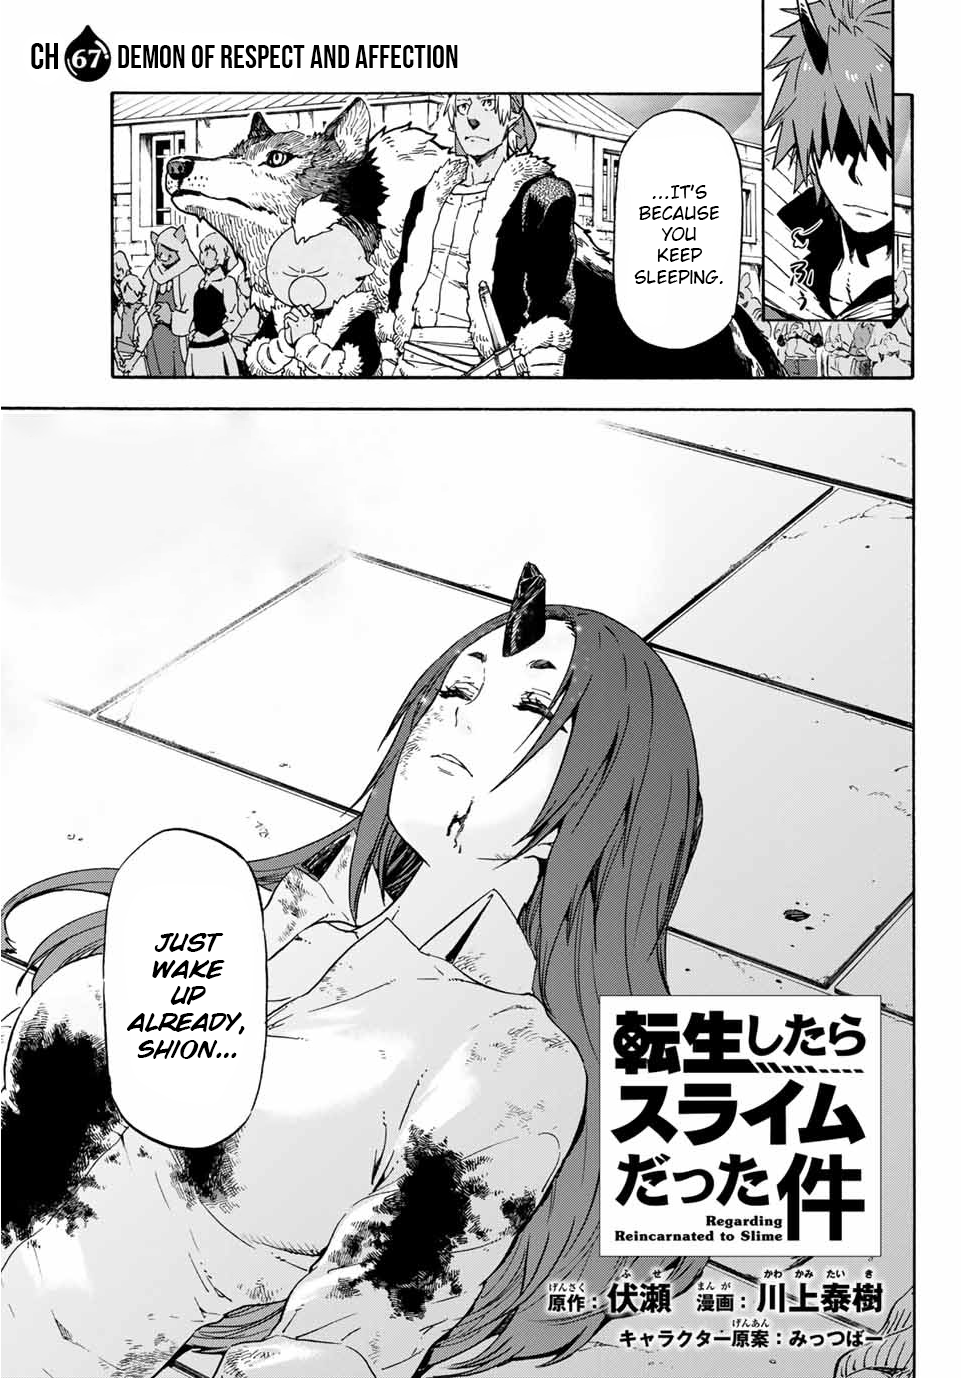 That Time I Got Reincarnated as a Slime, Chapter 67